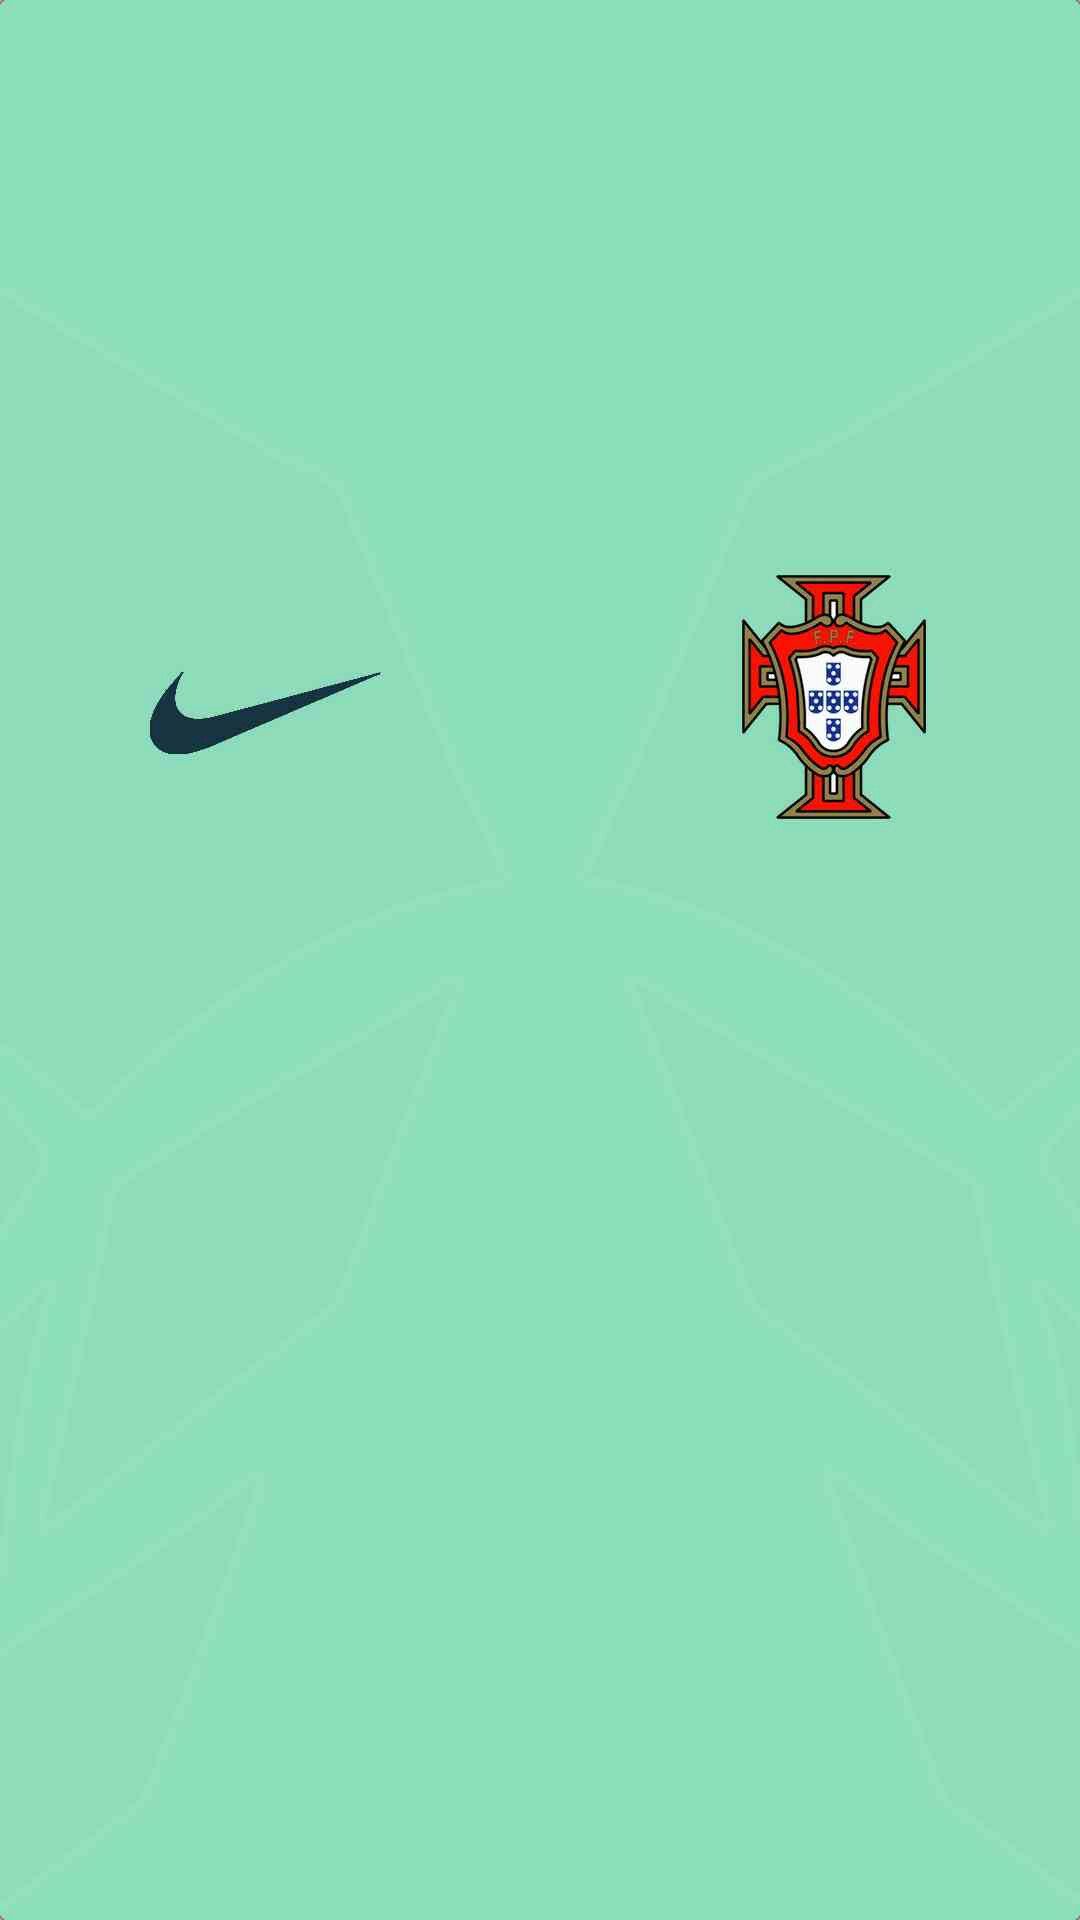 Portugal National Football Team Wallpapers